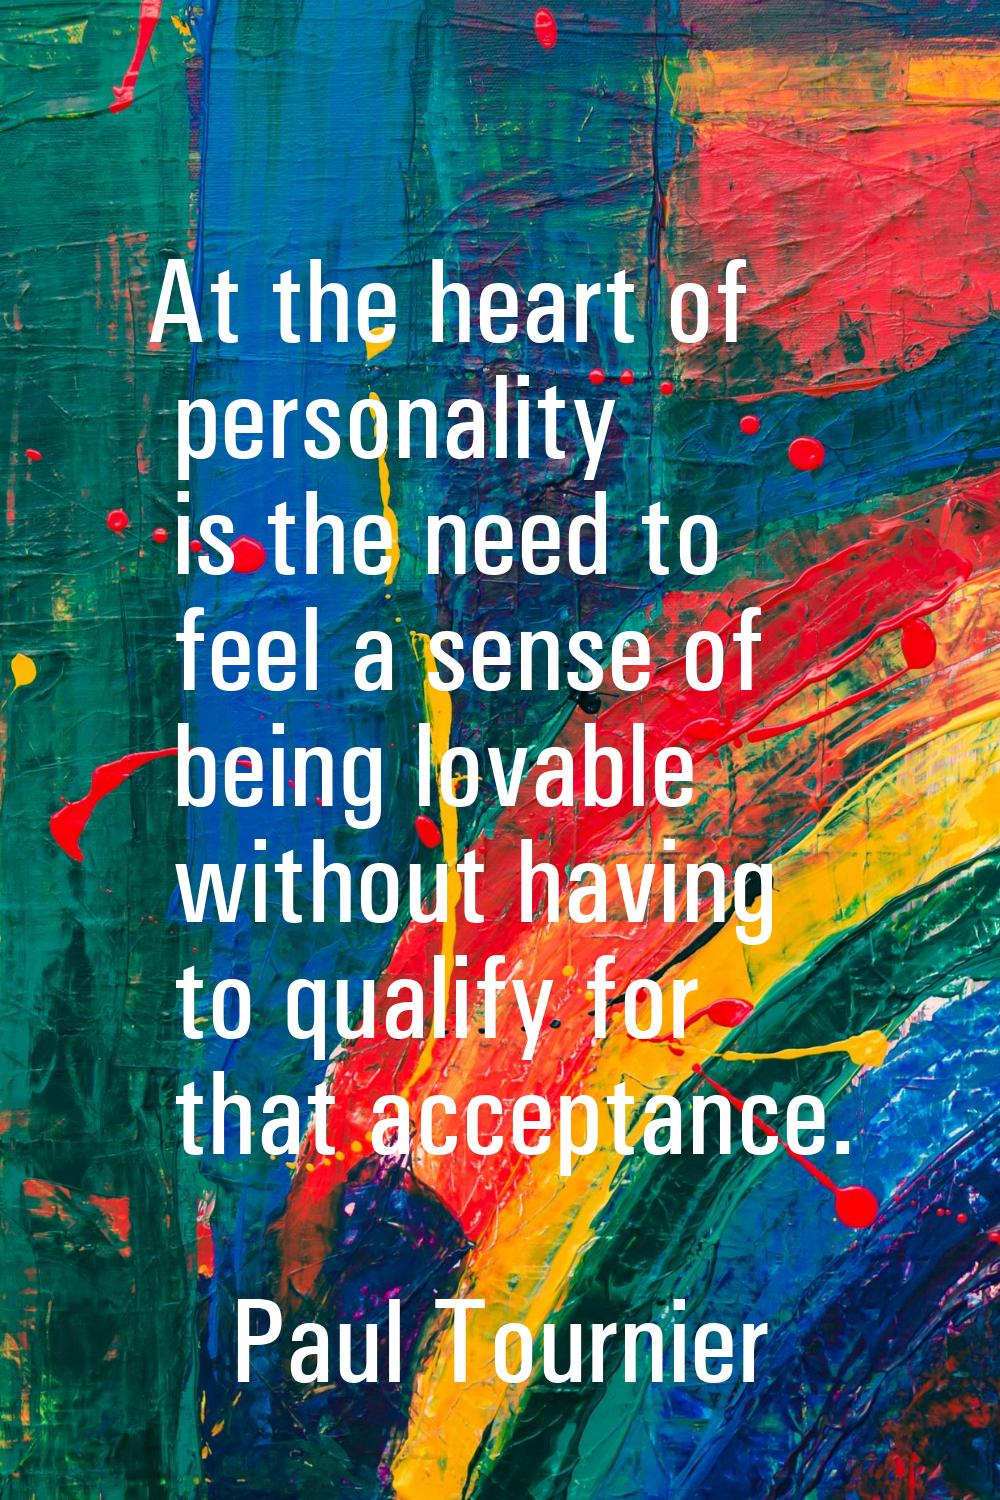 At the heart of personality is the need to feel a sense of being lovable without having to qualify 